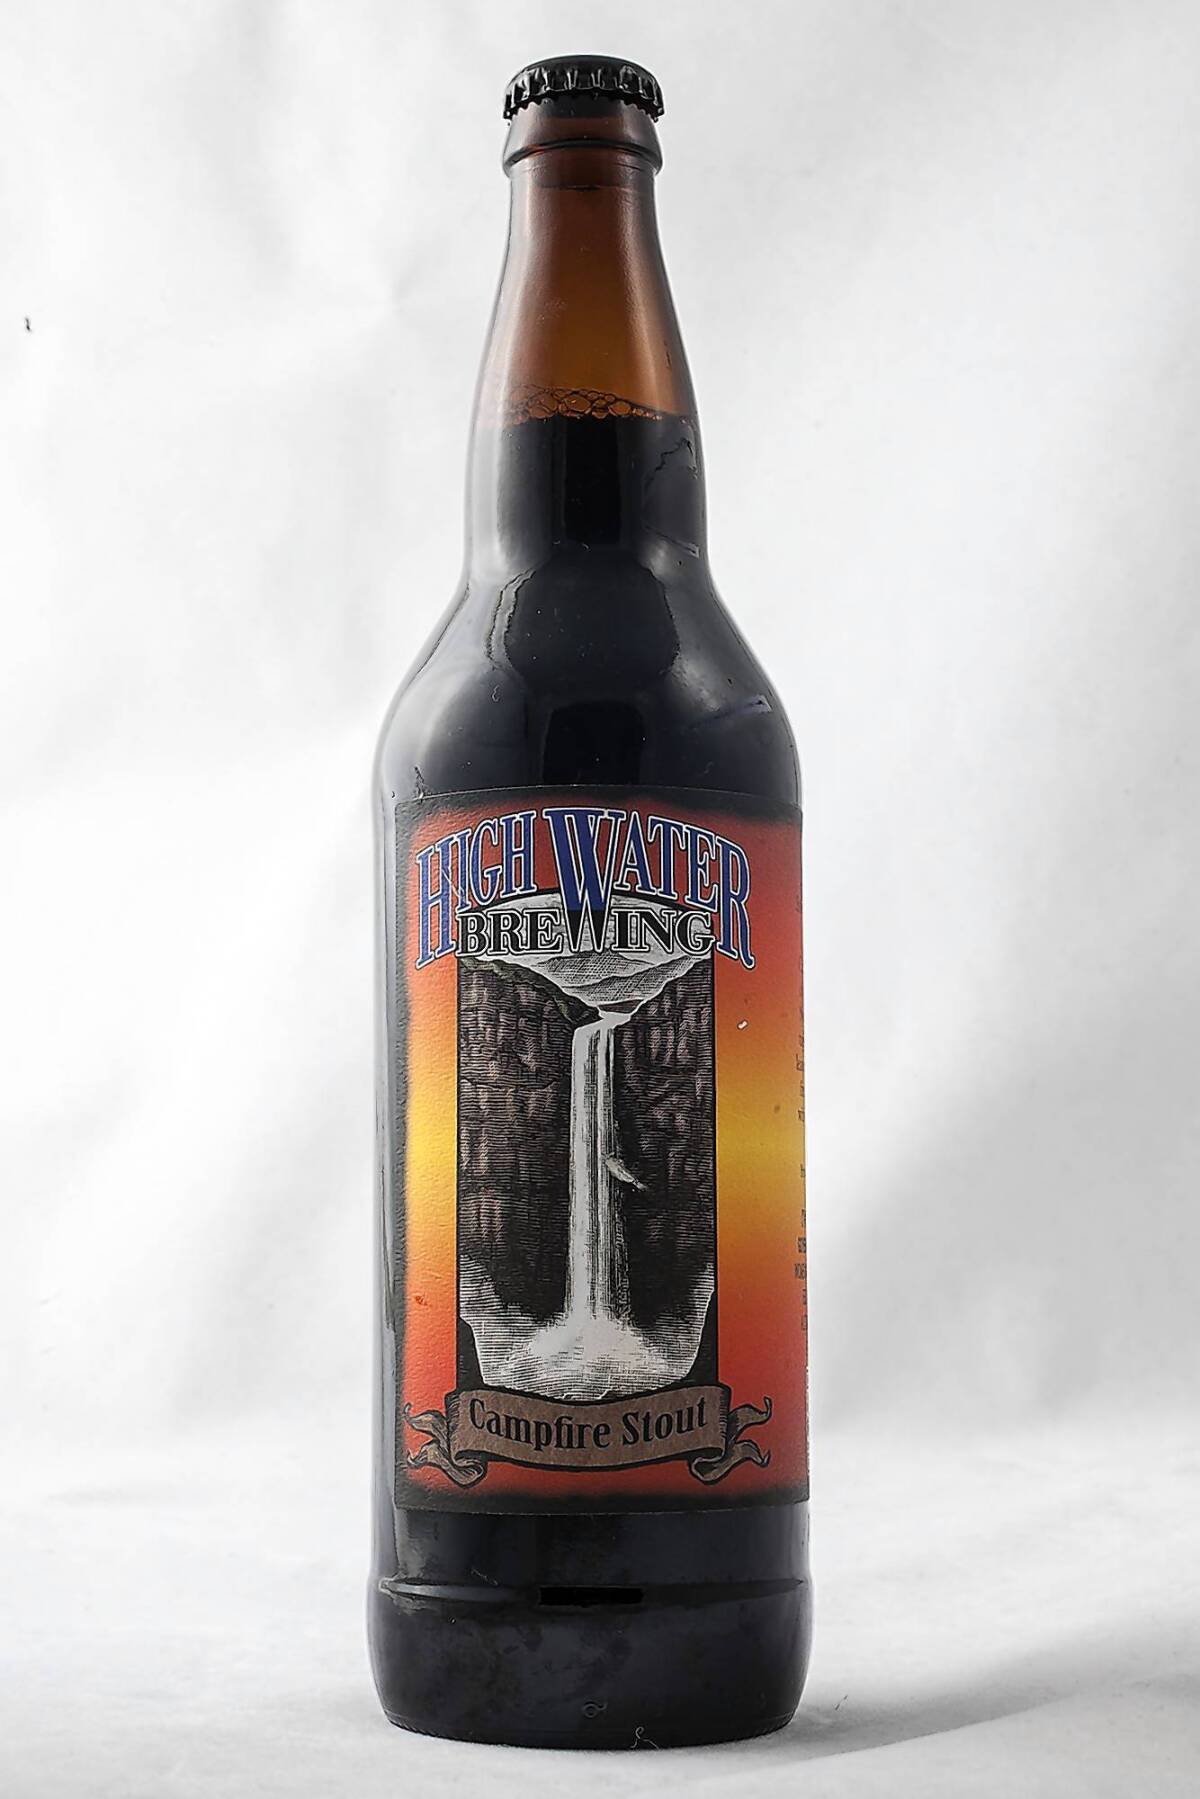 High Water Brewing’s Campfire Stout